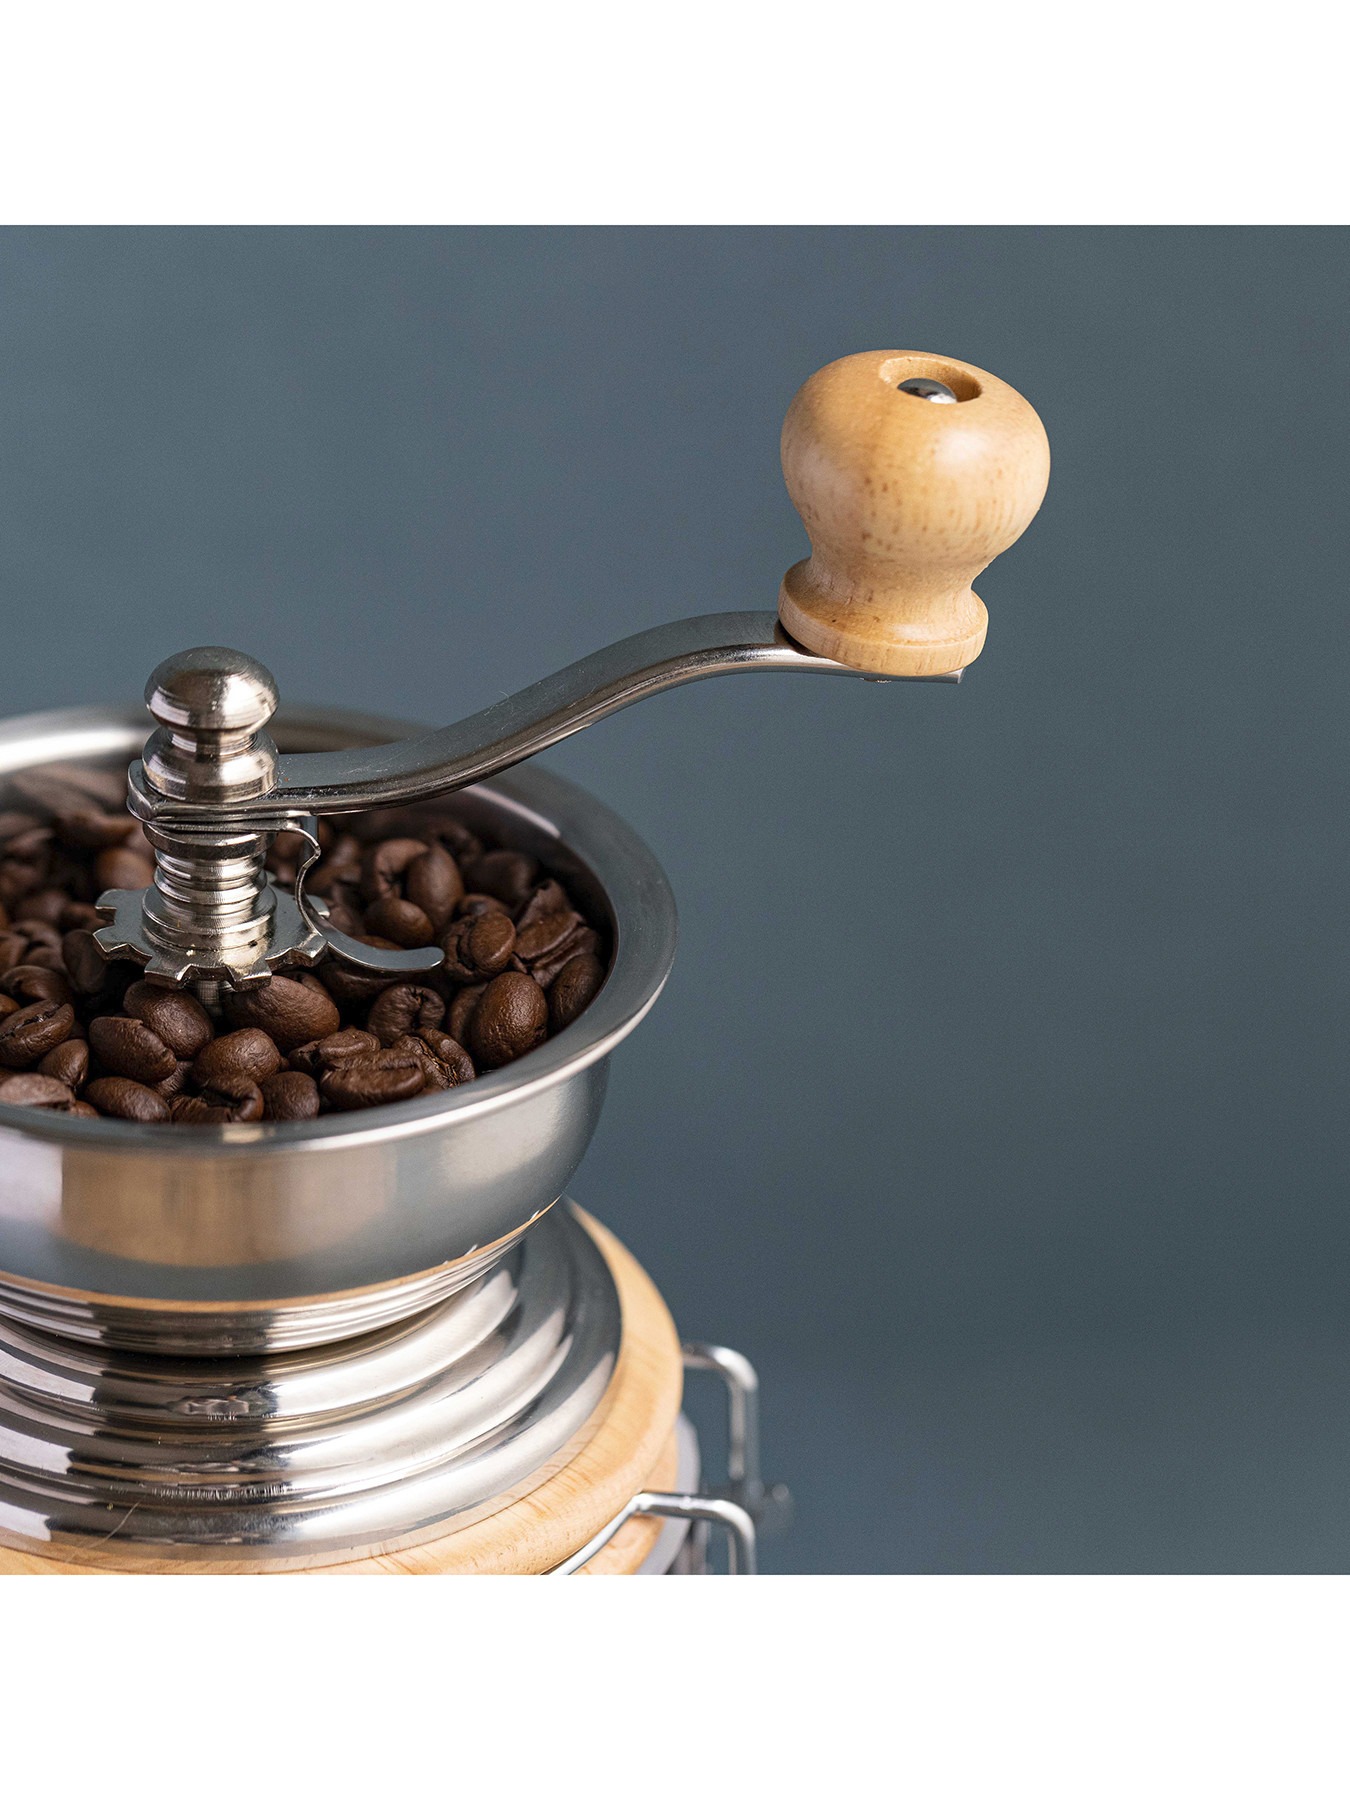 La Cafetiere Stainless Steel Traditional Coffee Grinder | Fenwick